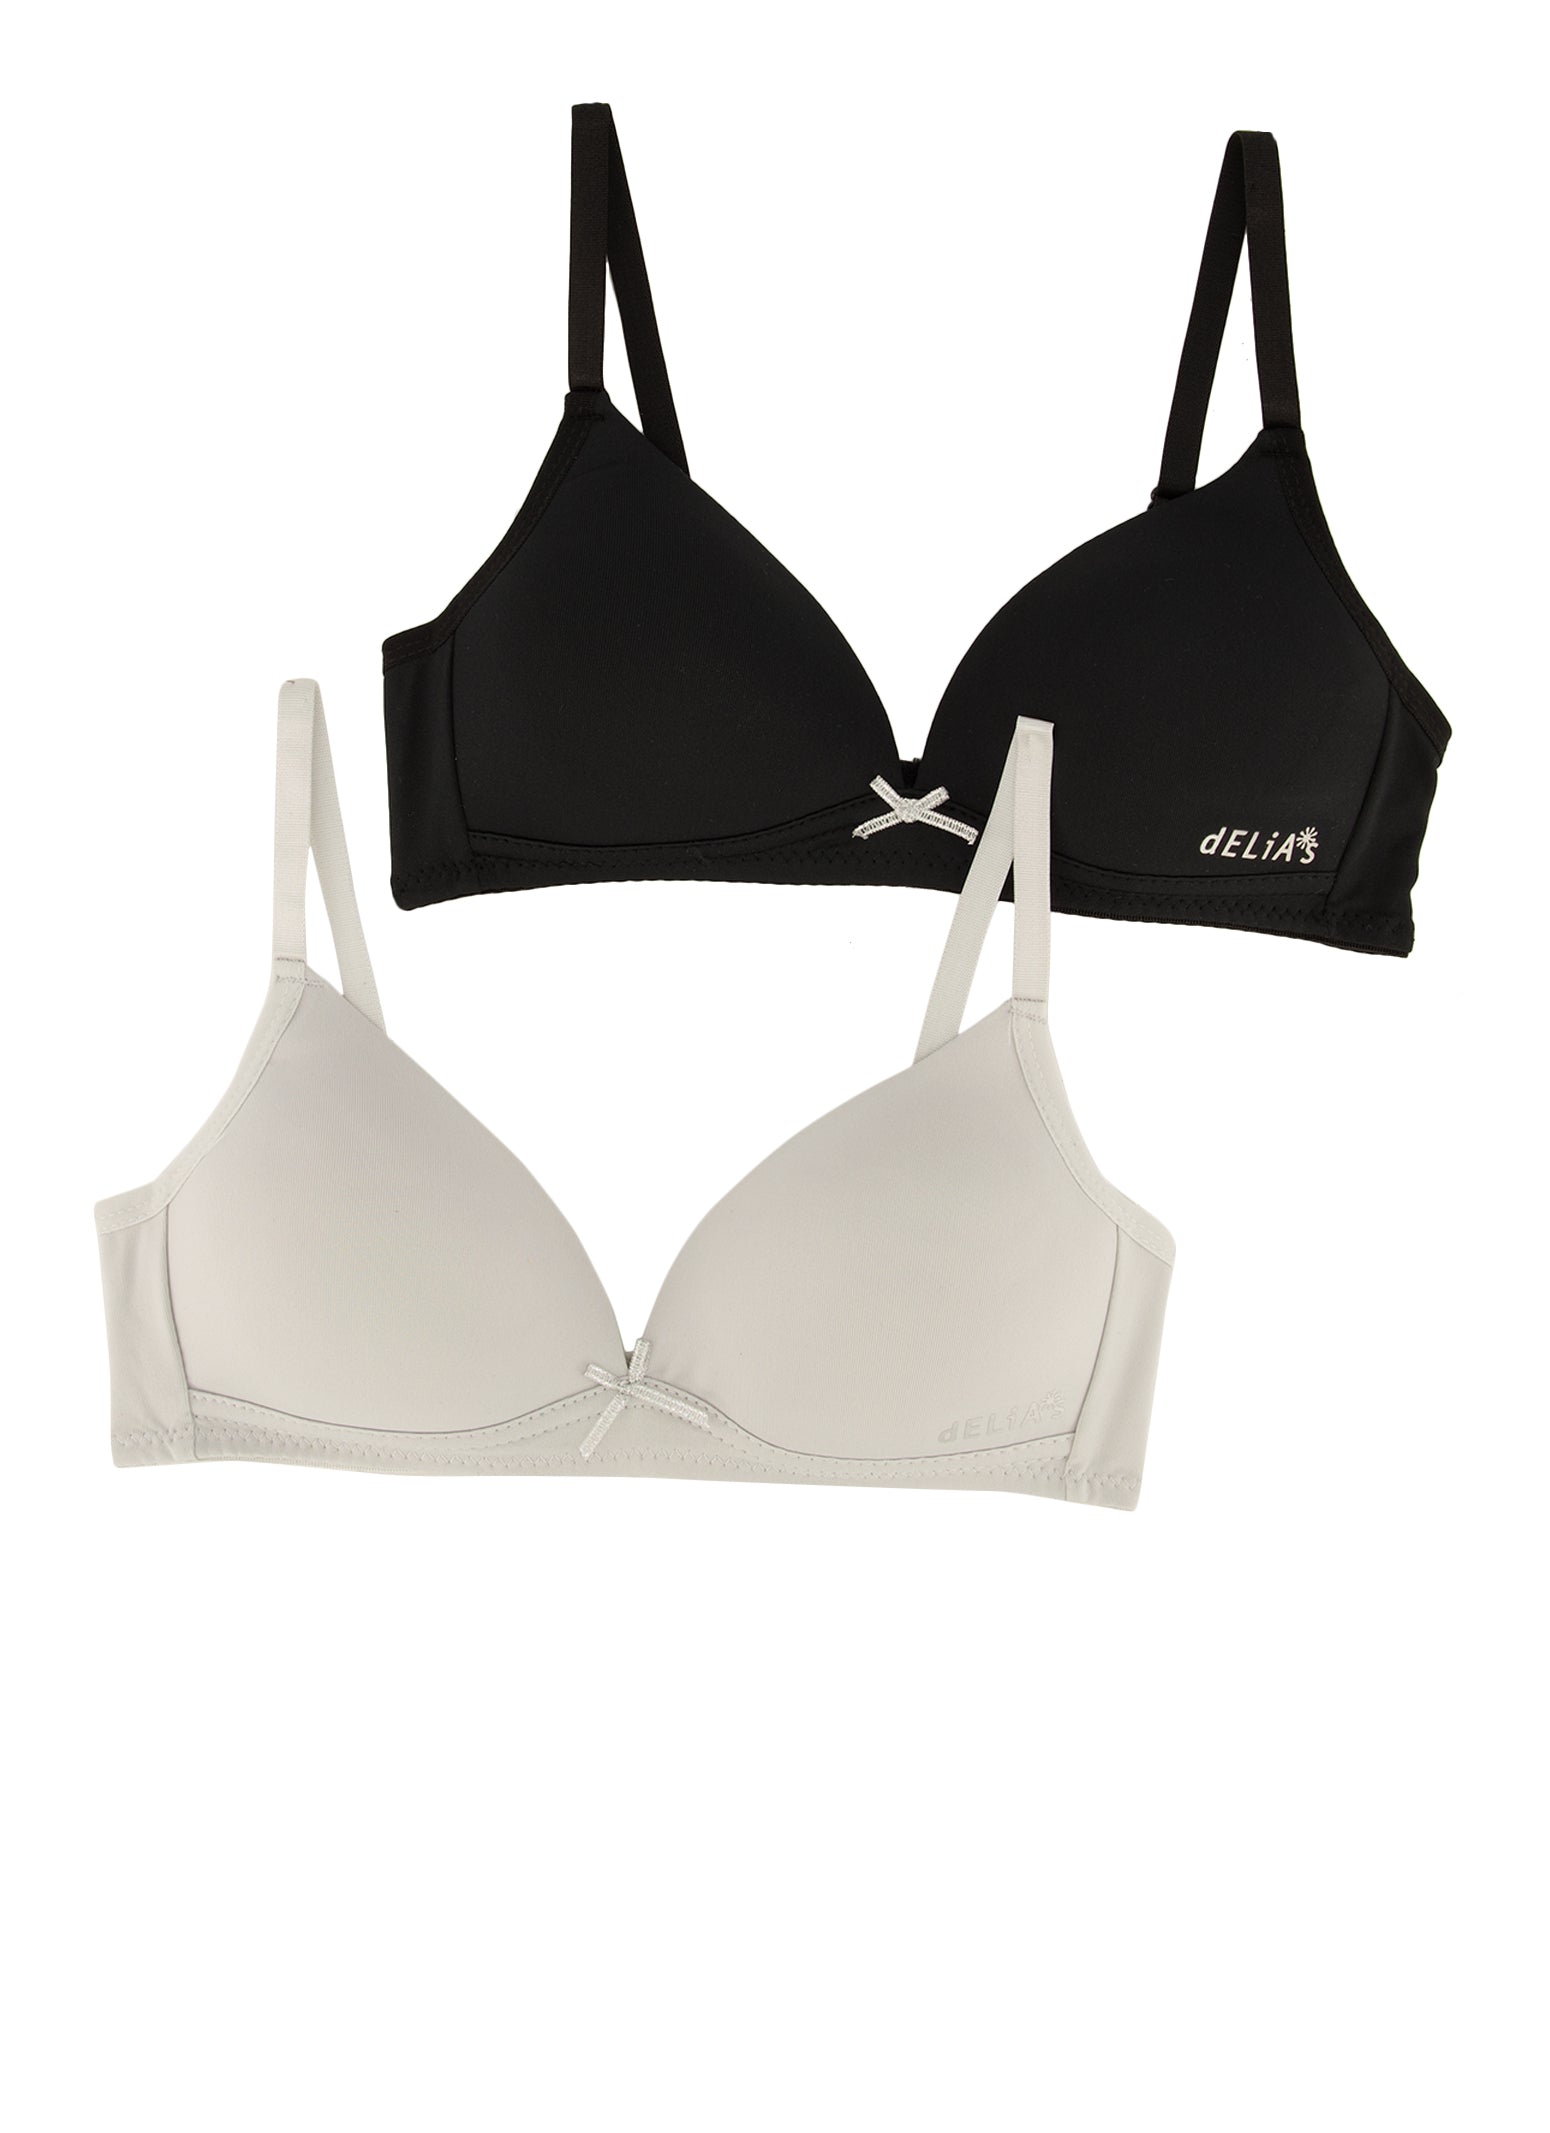 Buy Set of 2 - Solid Bra with Adjustable Straps and Hook and Eye Closure